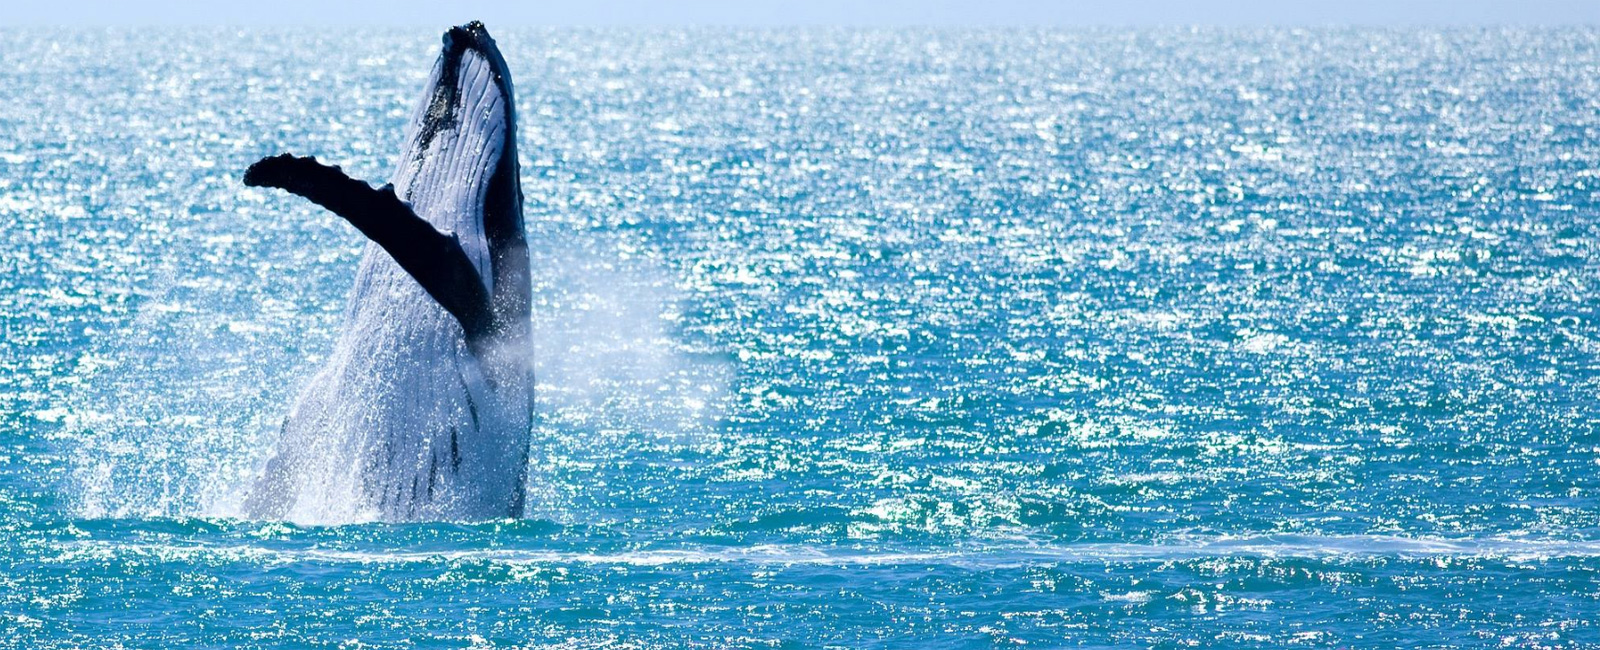 HILLARYS-WHALE-WATCHING-TOURS-whale-breach